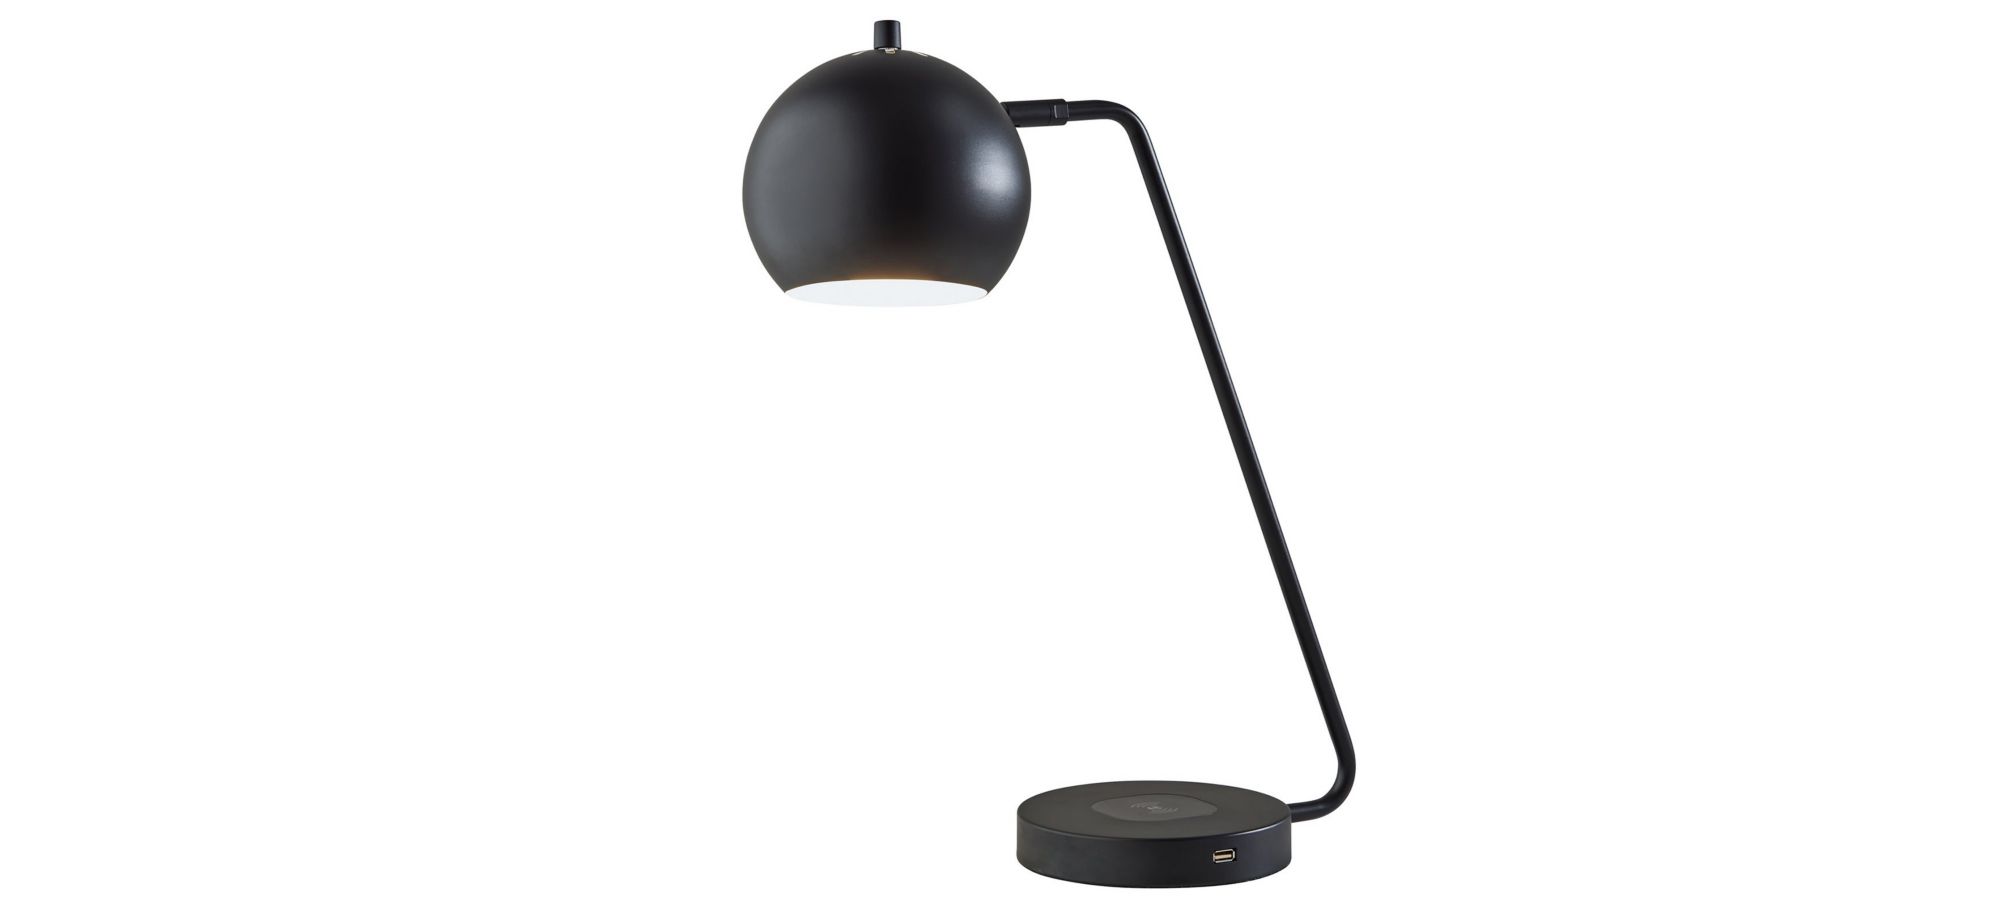 Emerson Wireless Charging Desk Lamp in Black by Adesso Inc